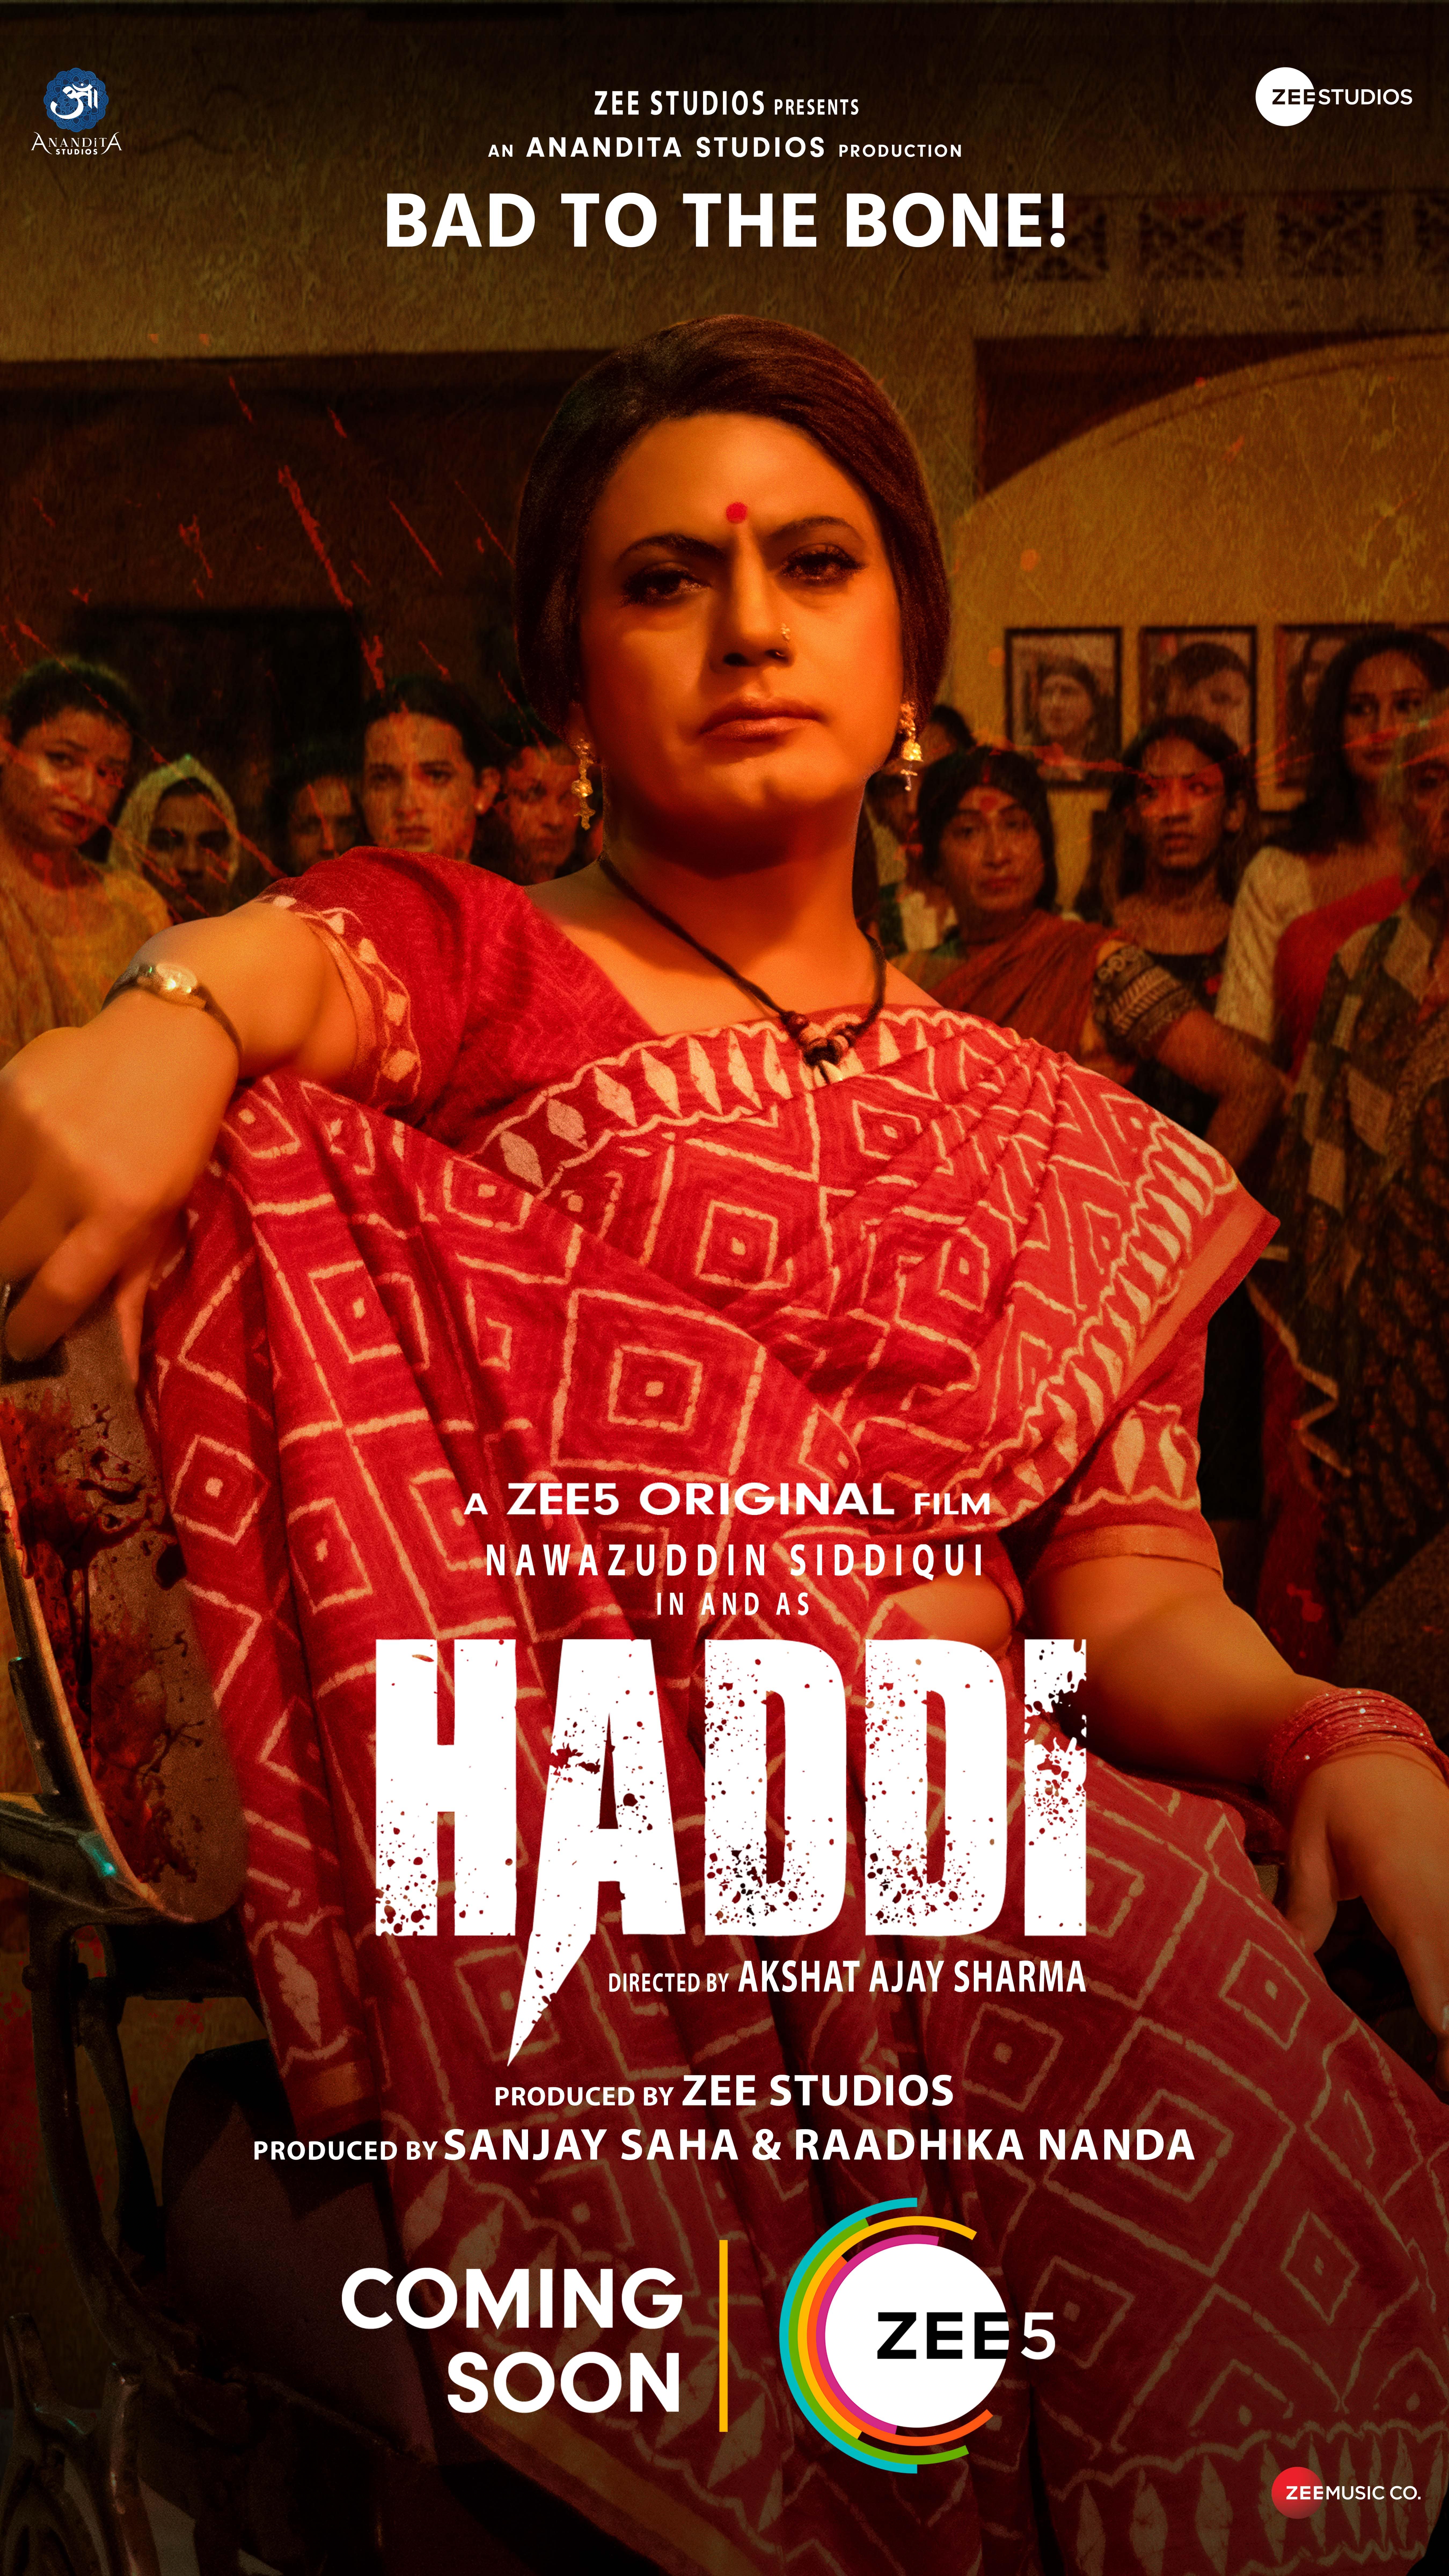  As Haddi rises through the criminal ranks in Delhi, dark secrets from his family's past are unveiled. Stream this gripping story of retribution on Zee5 starting September 7th.